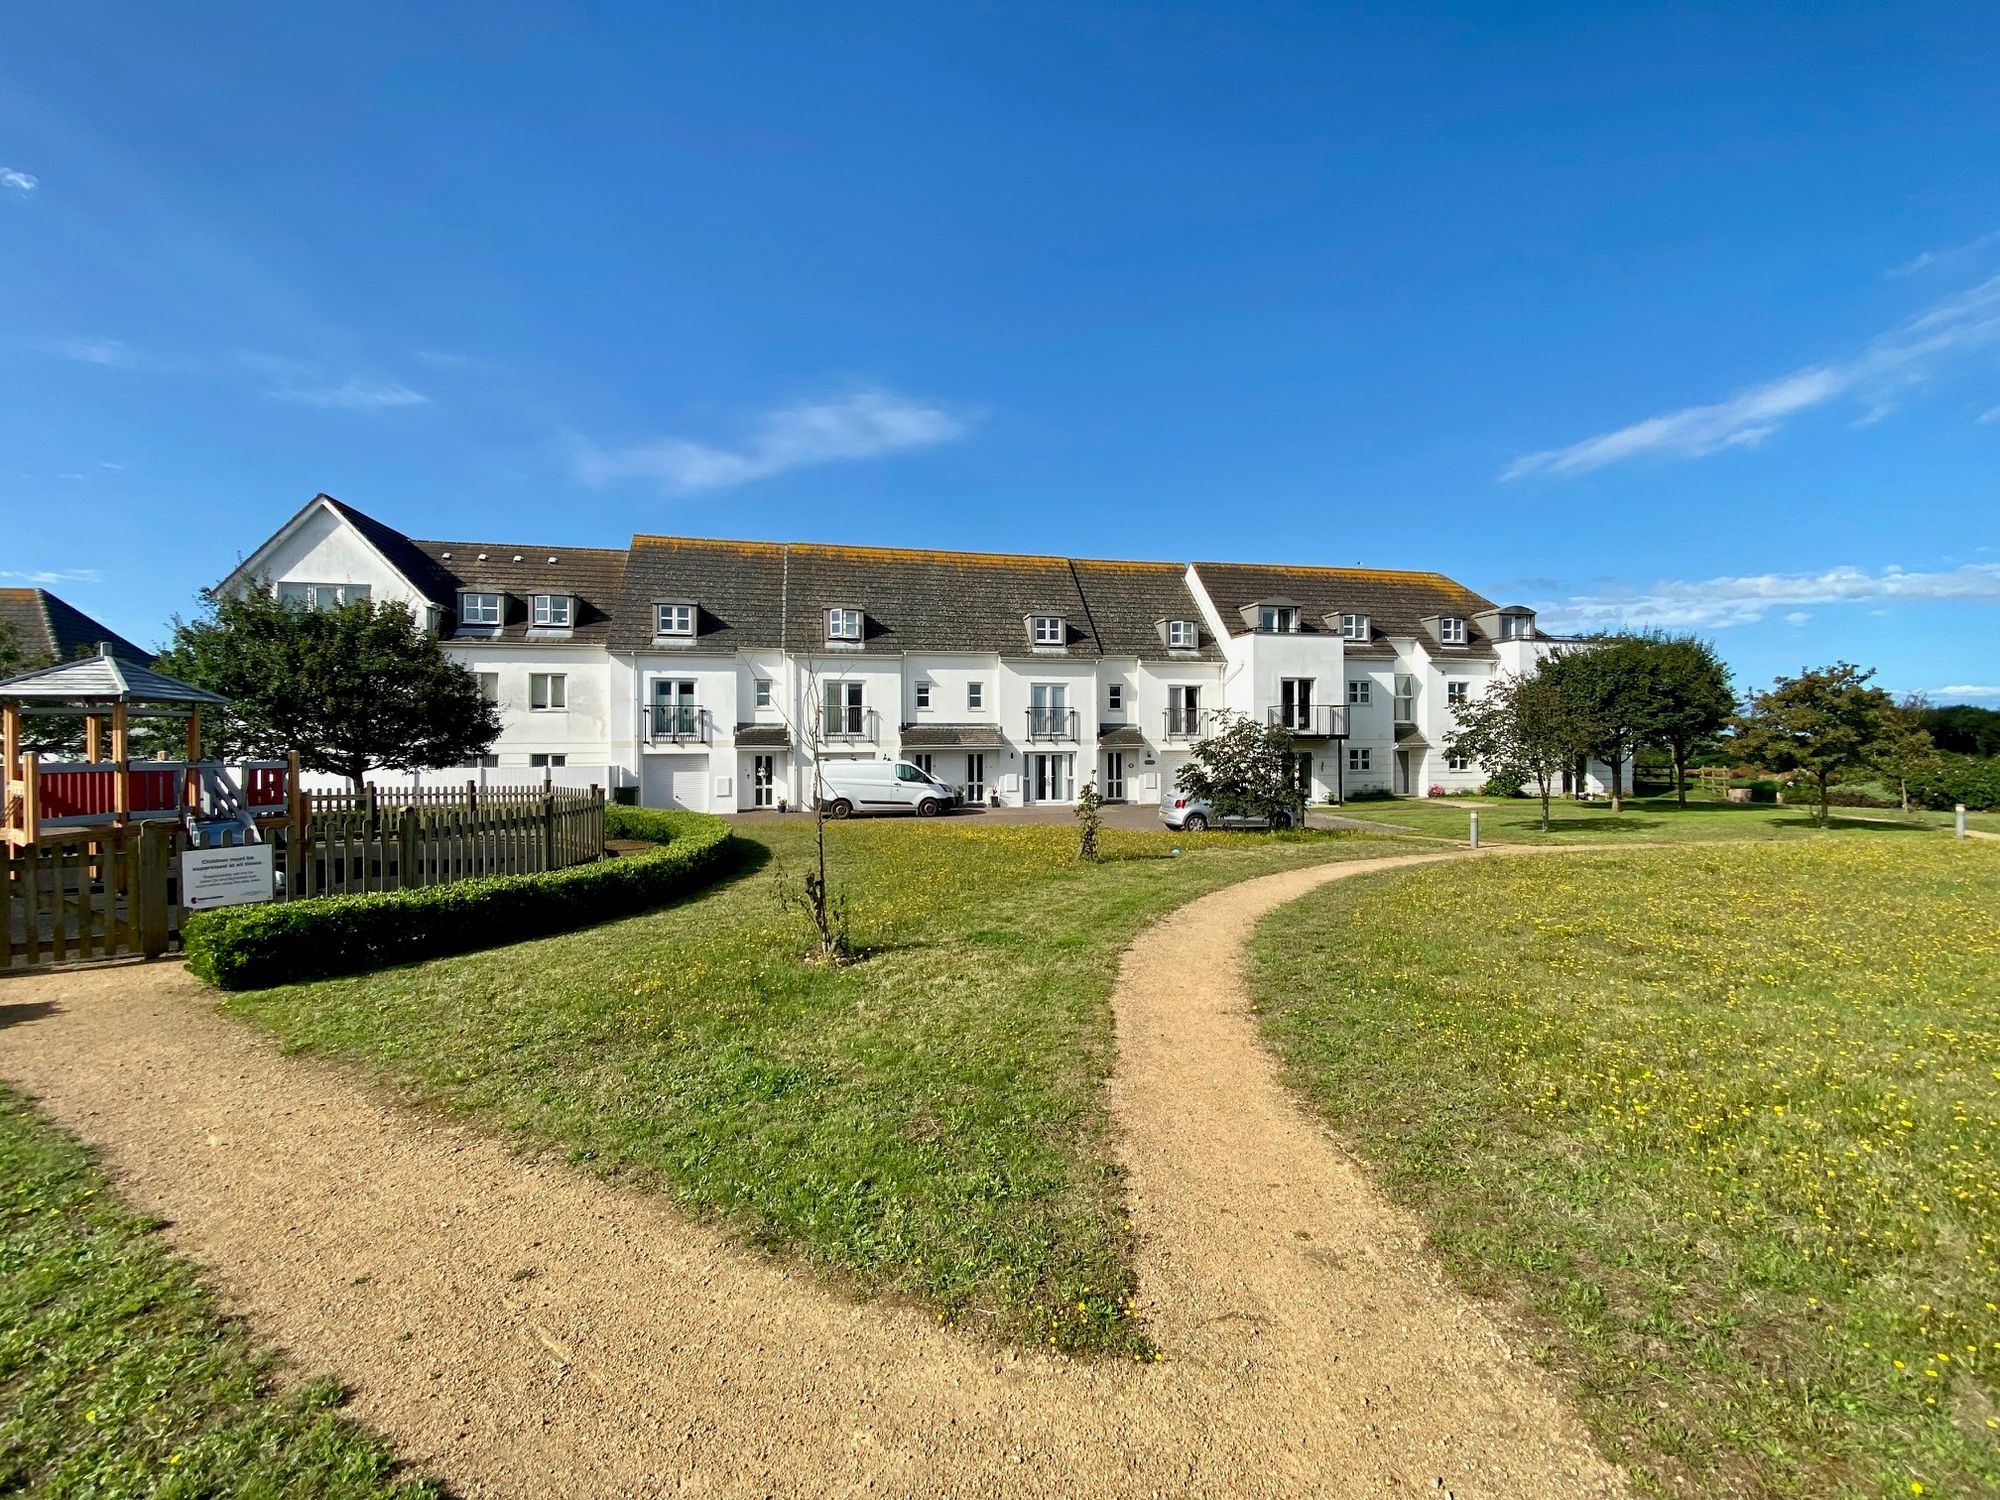 1 bed Property For Rent in St. Peter, Jersey